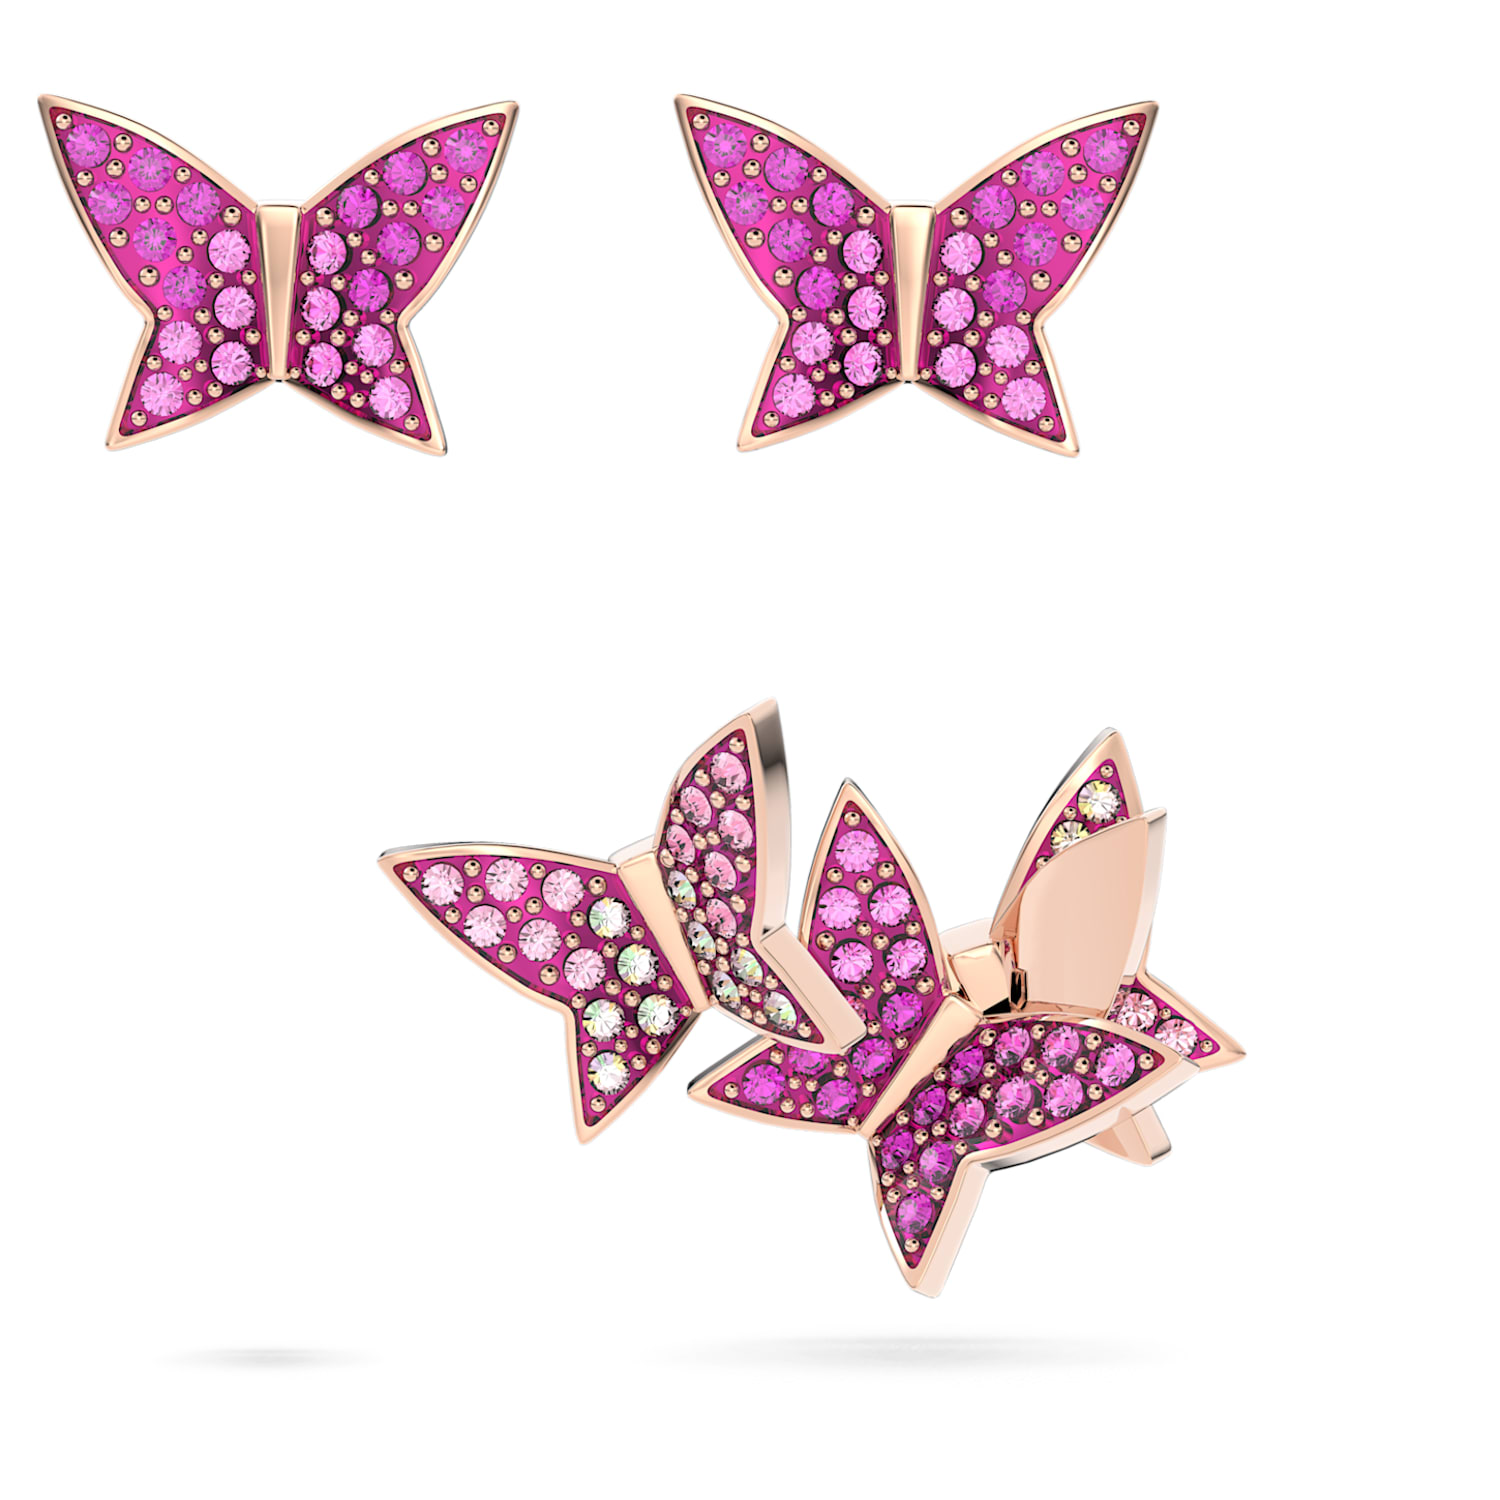 Butterfly earrings. Butterfly rose gold stainless steel small cut out earring